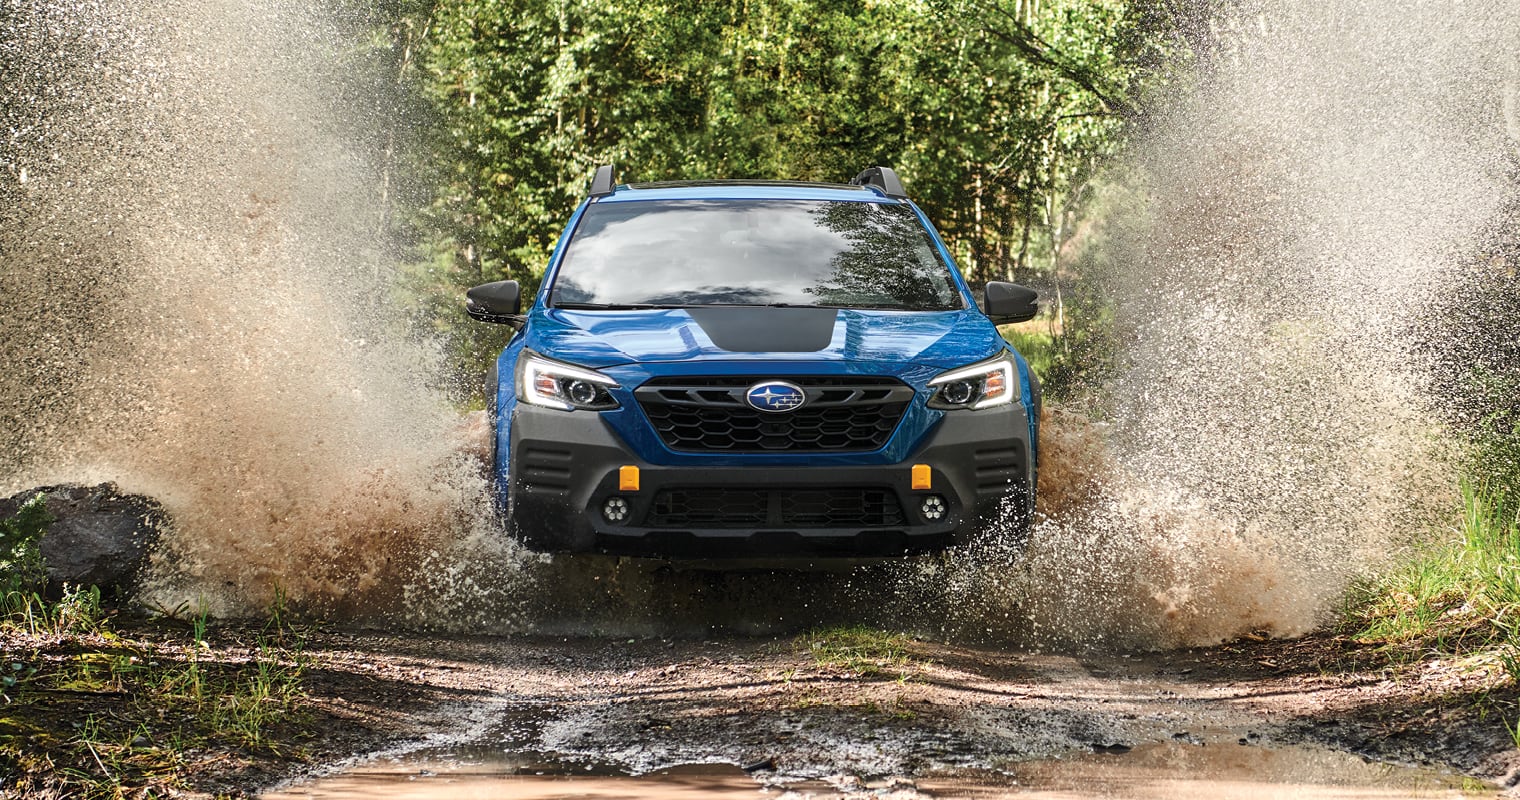 2022 Subaru Outback Wilderness Edition in the mud